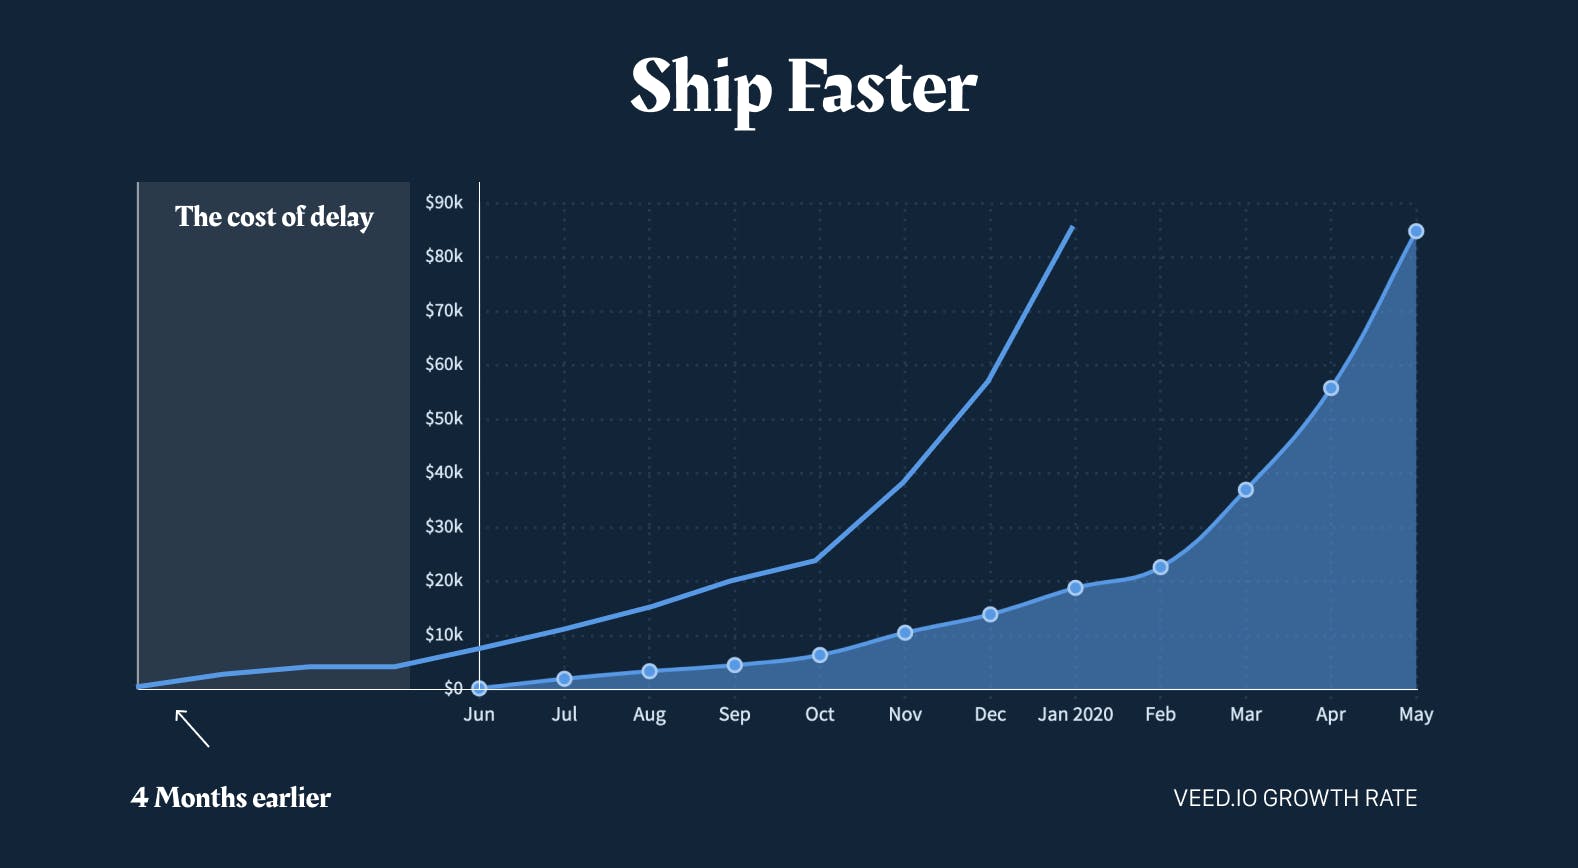 The cost of launching late. Credit: veed.io.